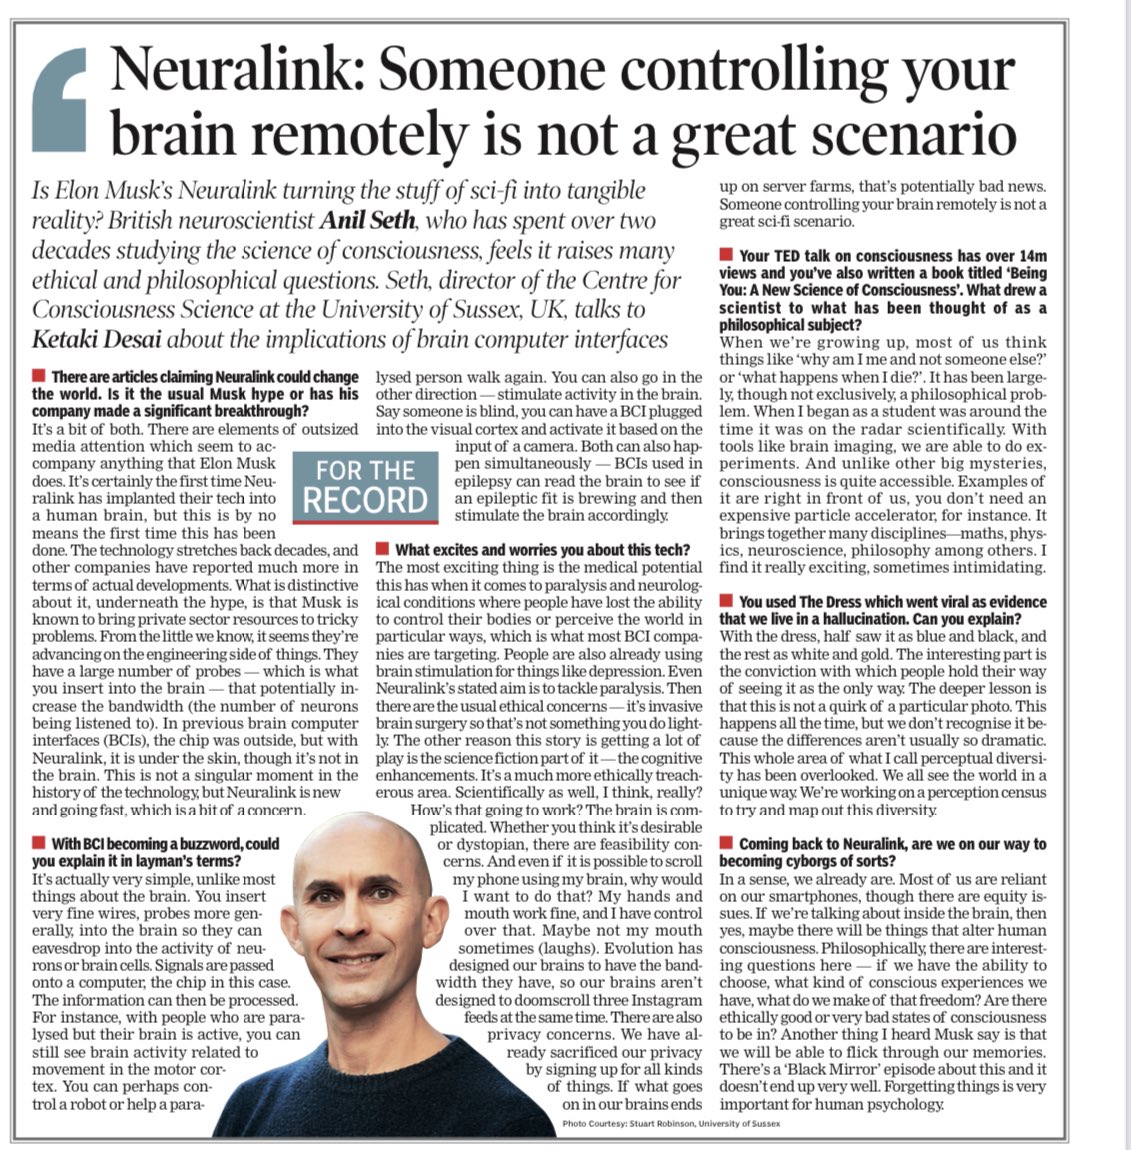 I interviewed @anilkseth about the implications of Neuralink and other brain computer interfaces